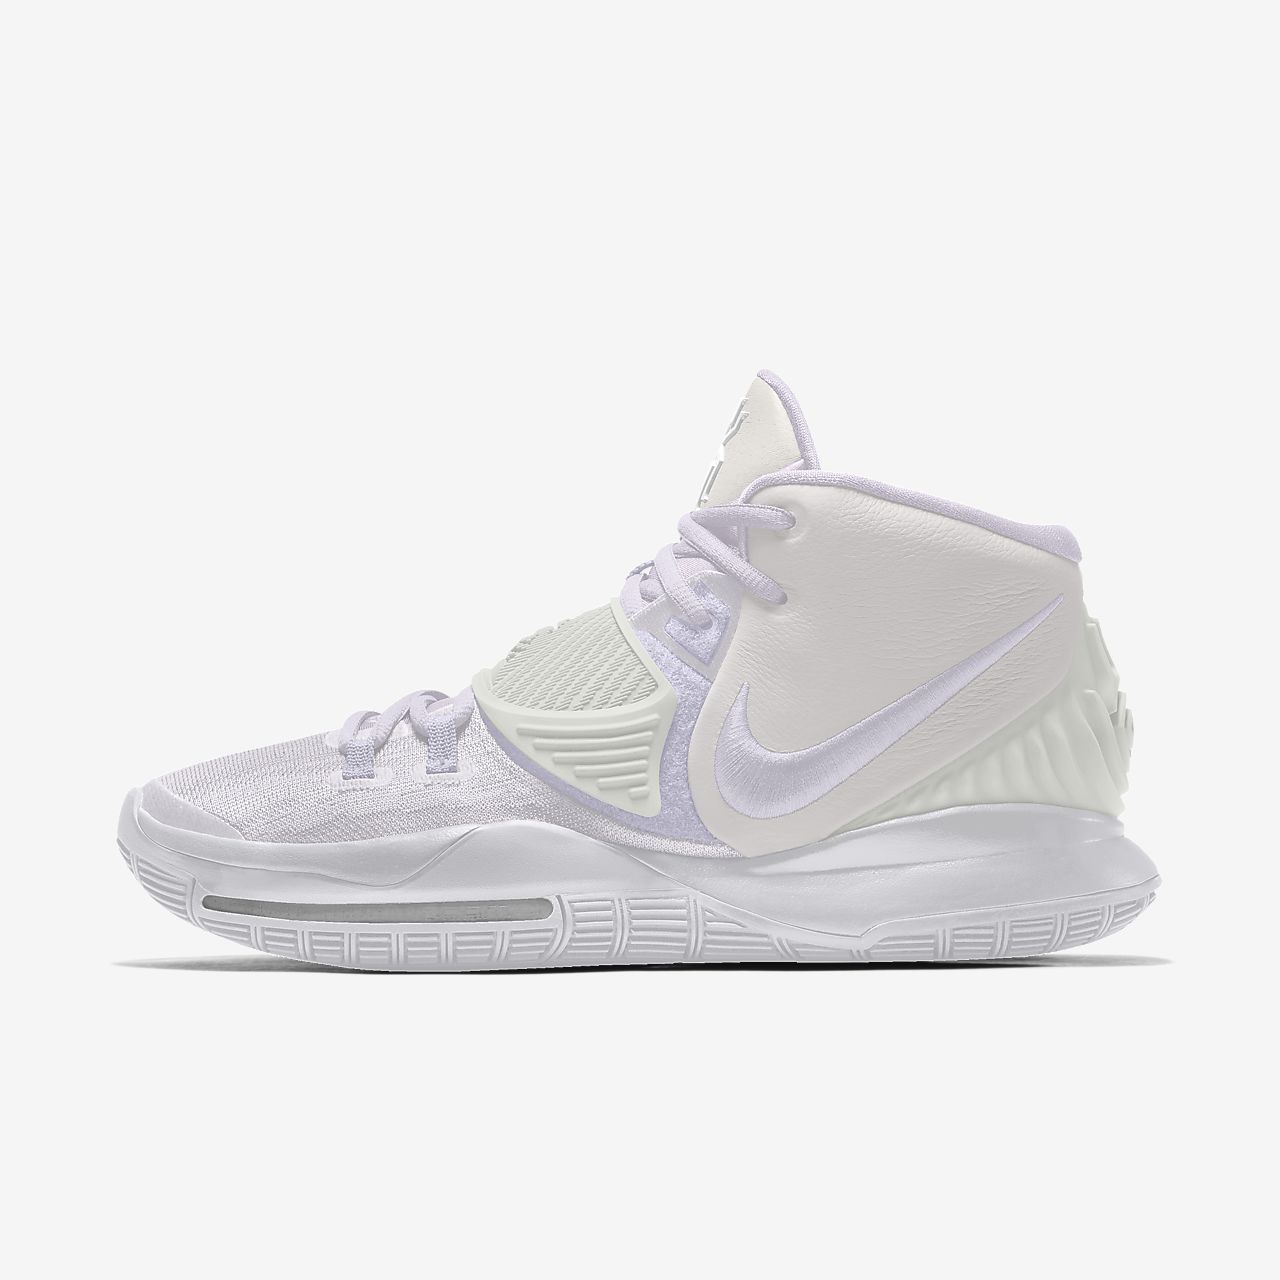 customize your own kyrie 5